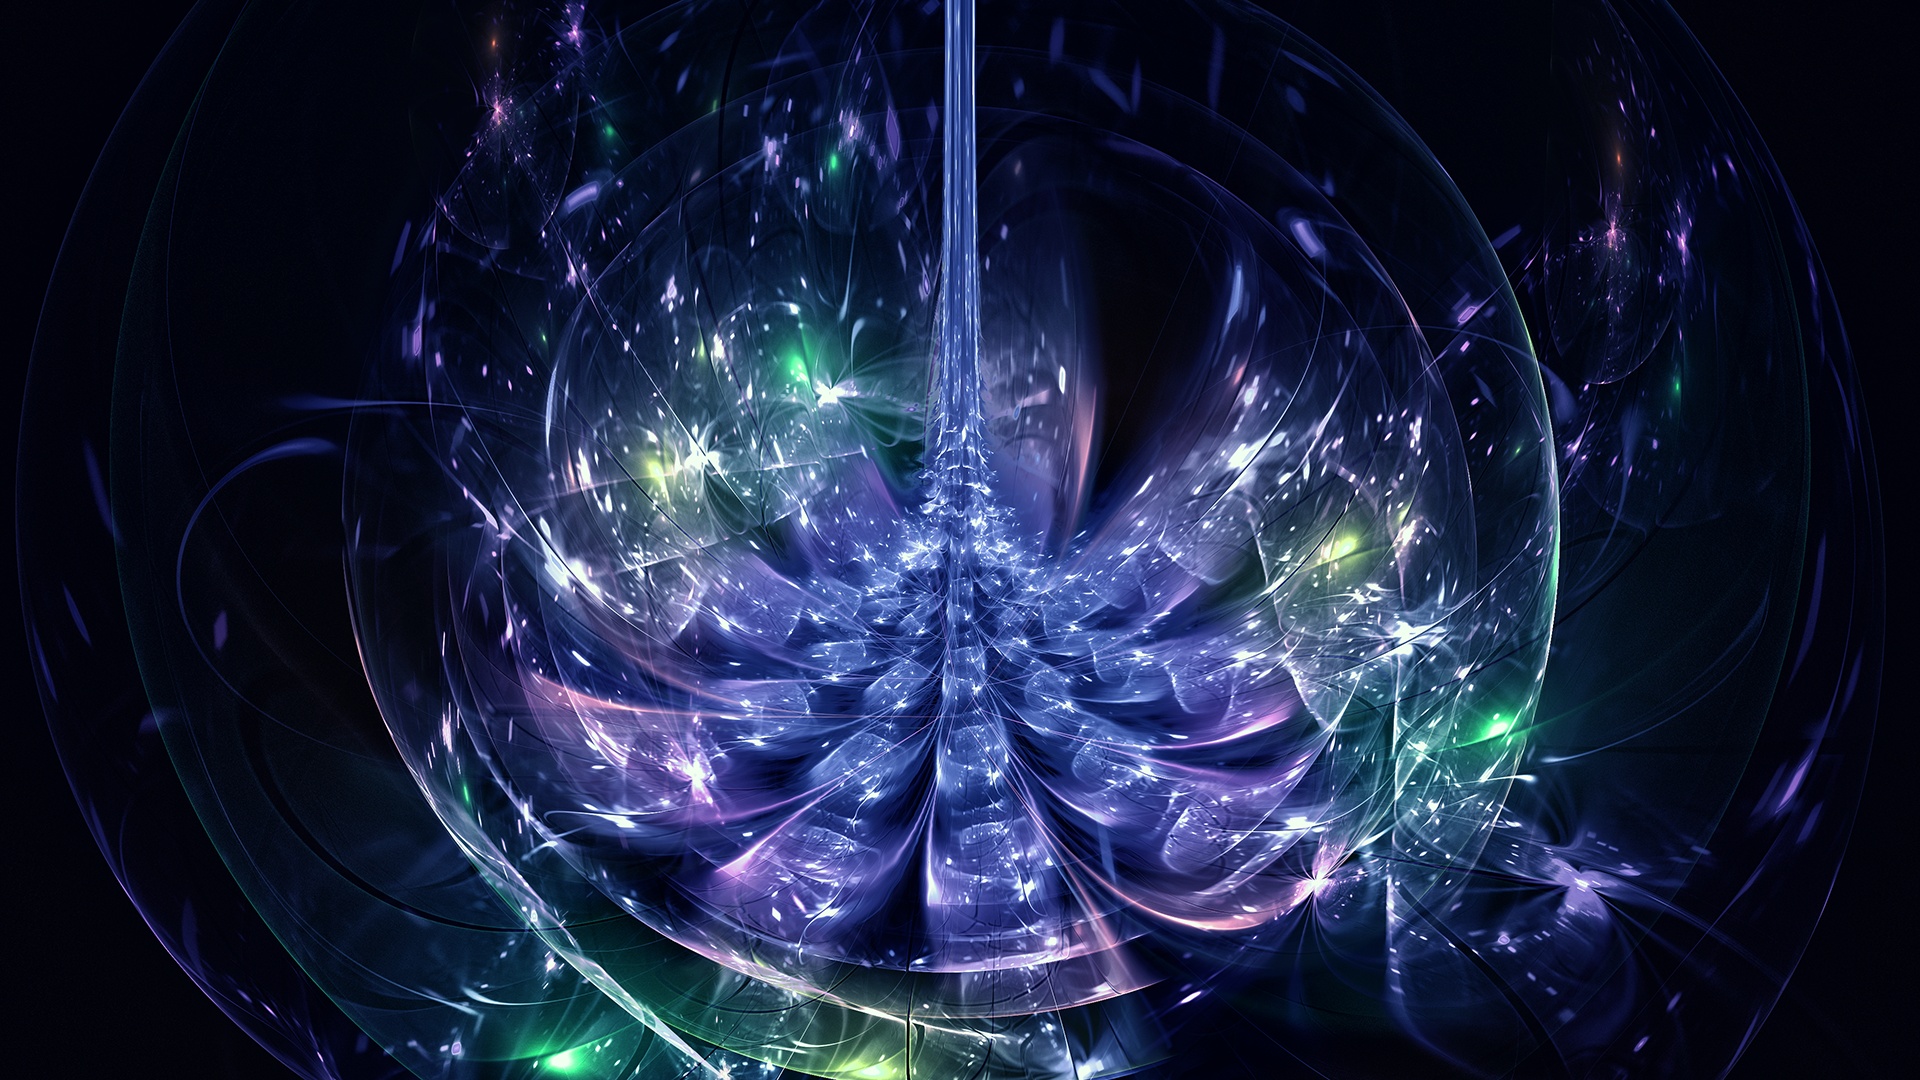 Crystal Flower HDr Render The Official Jwildfire